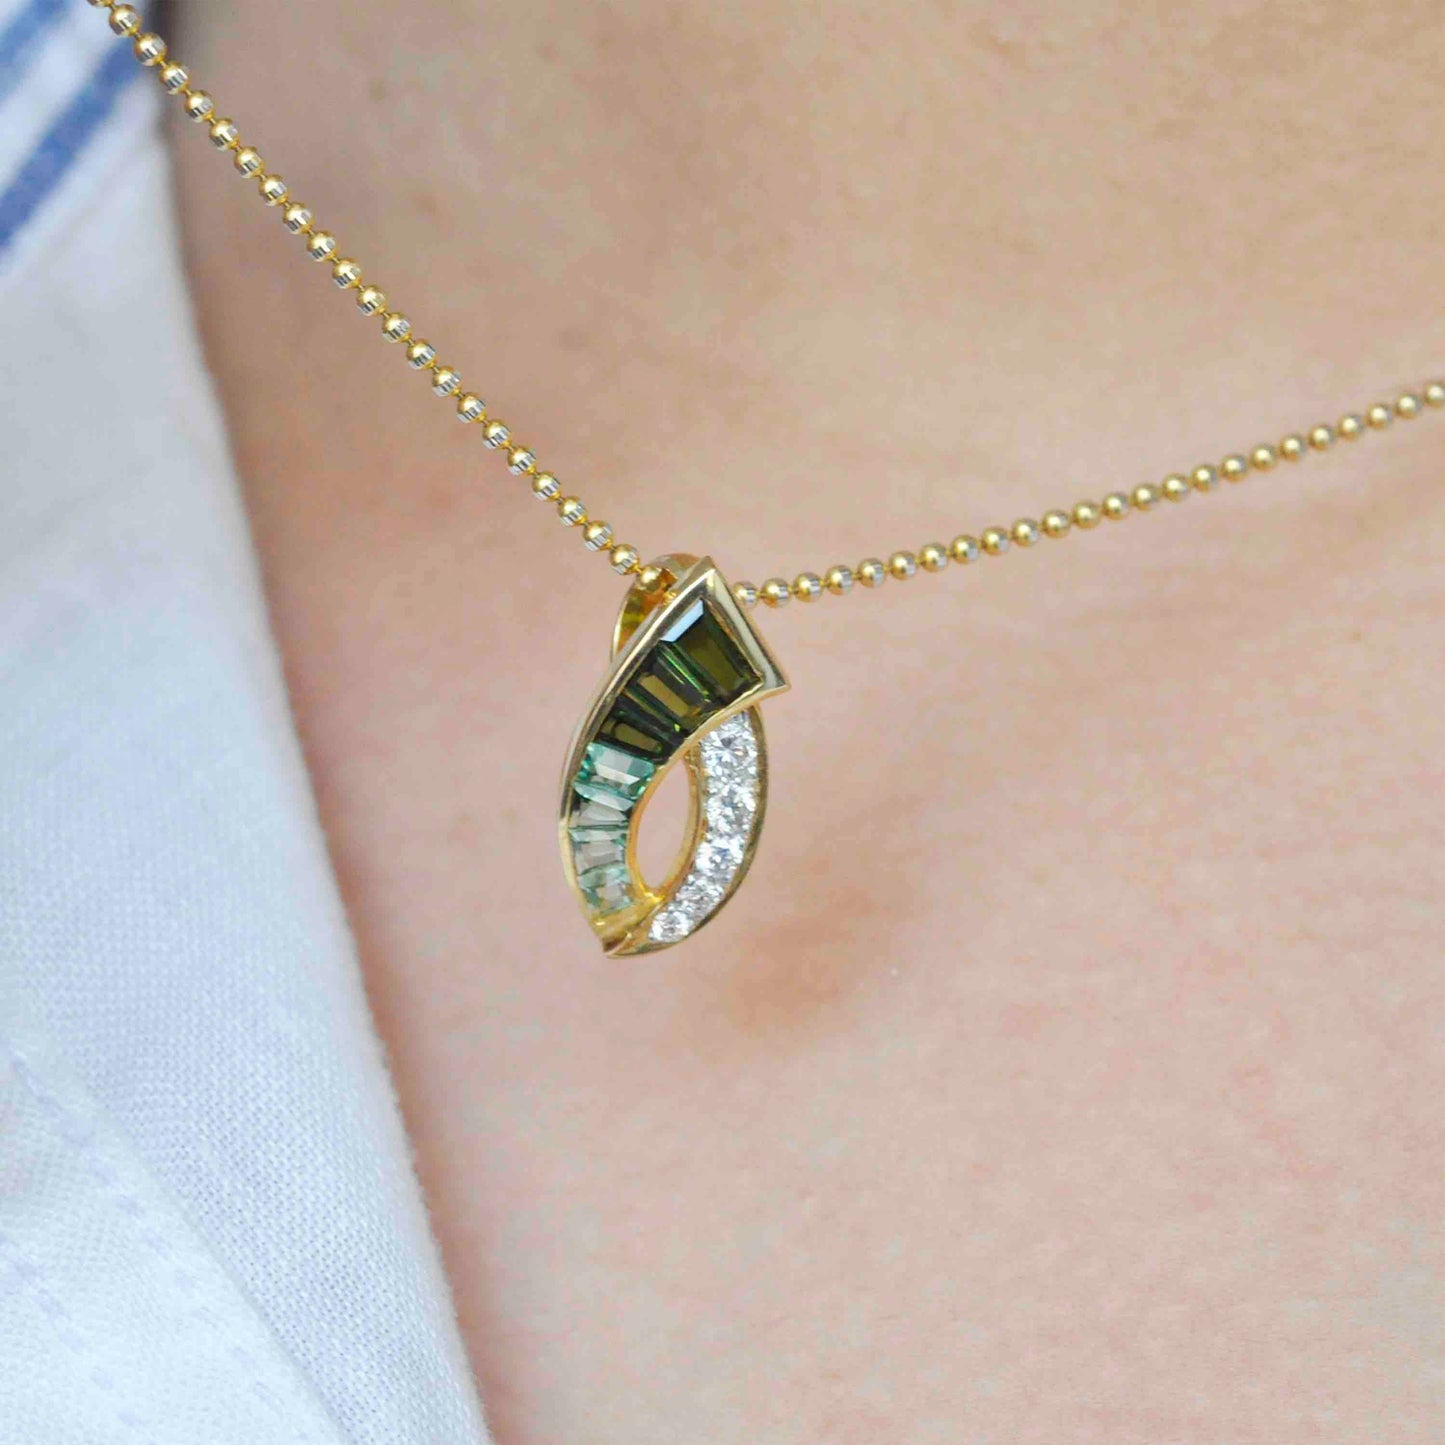 green tourmaline and diamond pendant with a curved design